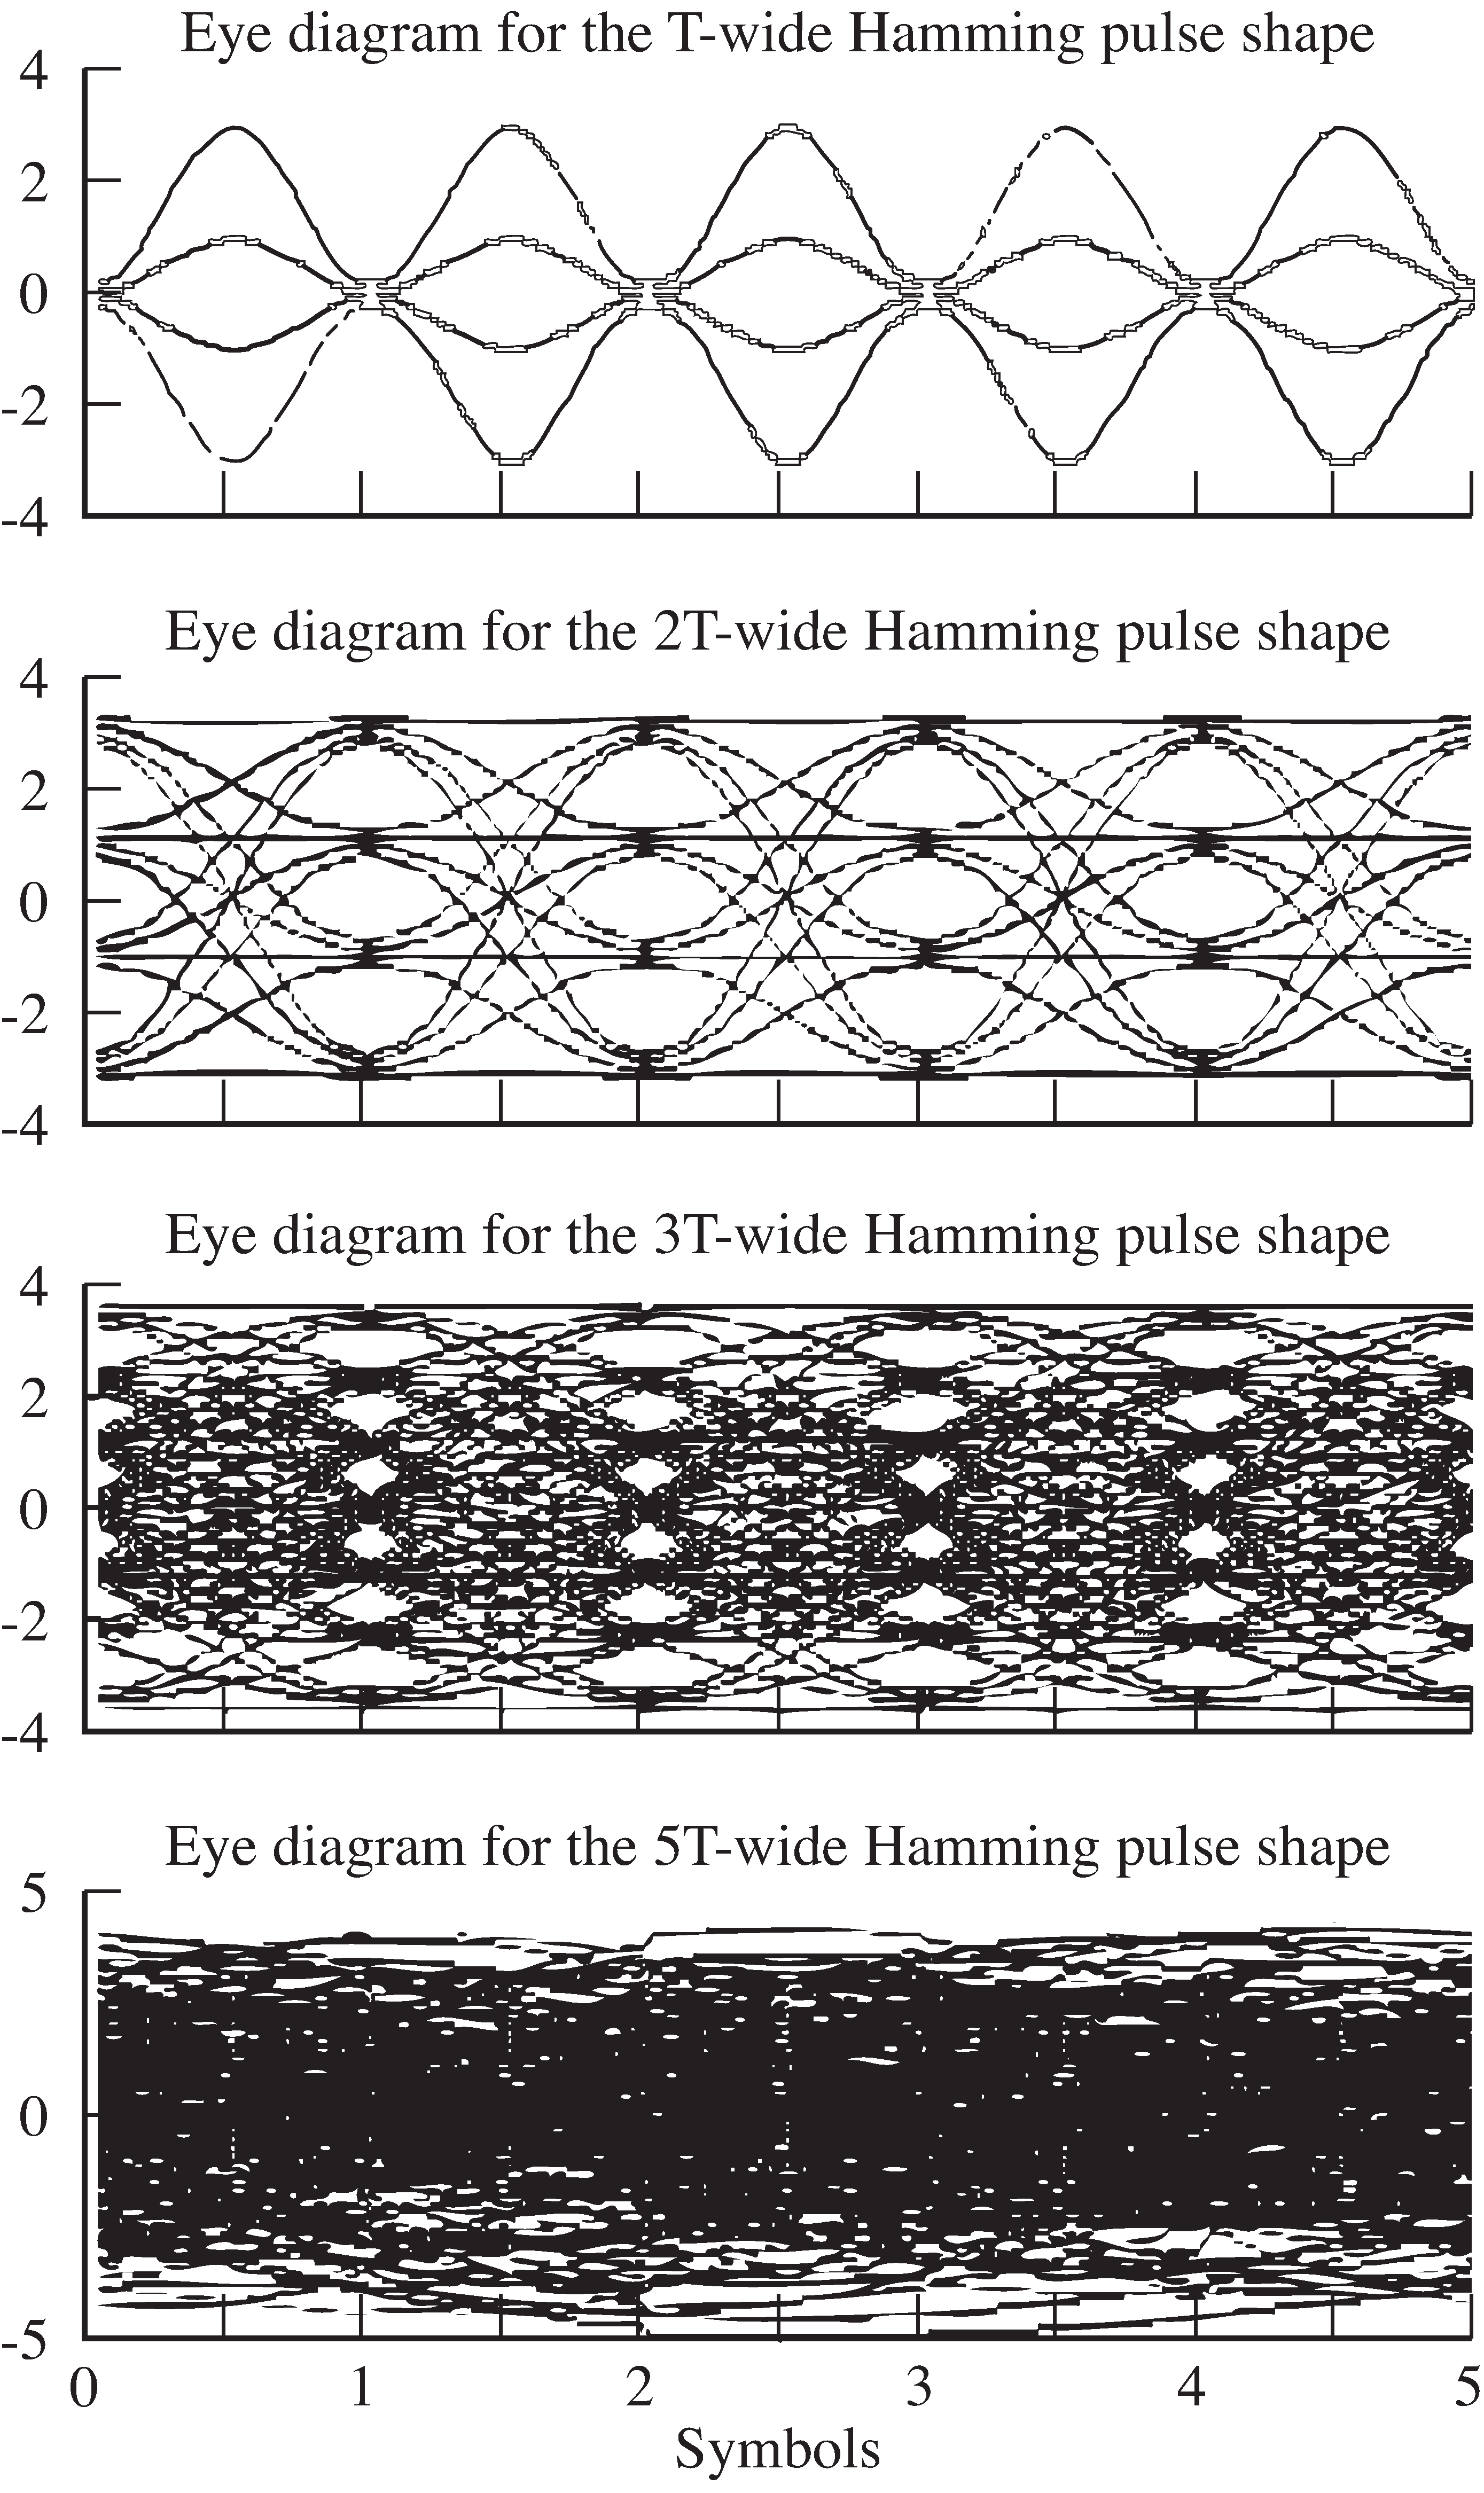 Eye diagrams for T, 2T, 3T, and 5T-wide Hamming pulse shapes show how the sensitivity to noises and timing errors increases as the pulse shape widens. The closed eye in the bottom plot means that symbol errors are inevitable.